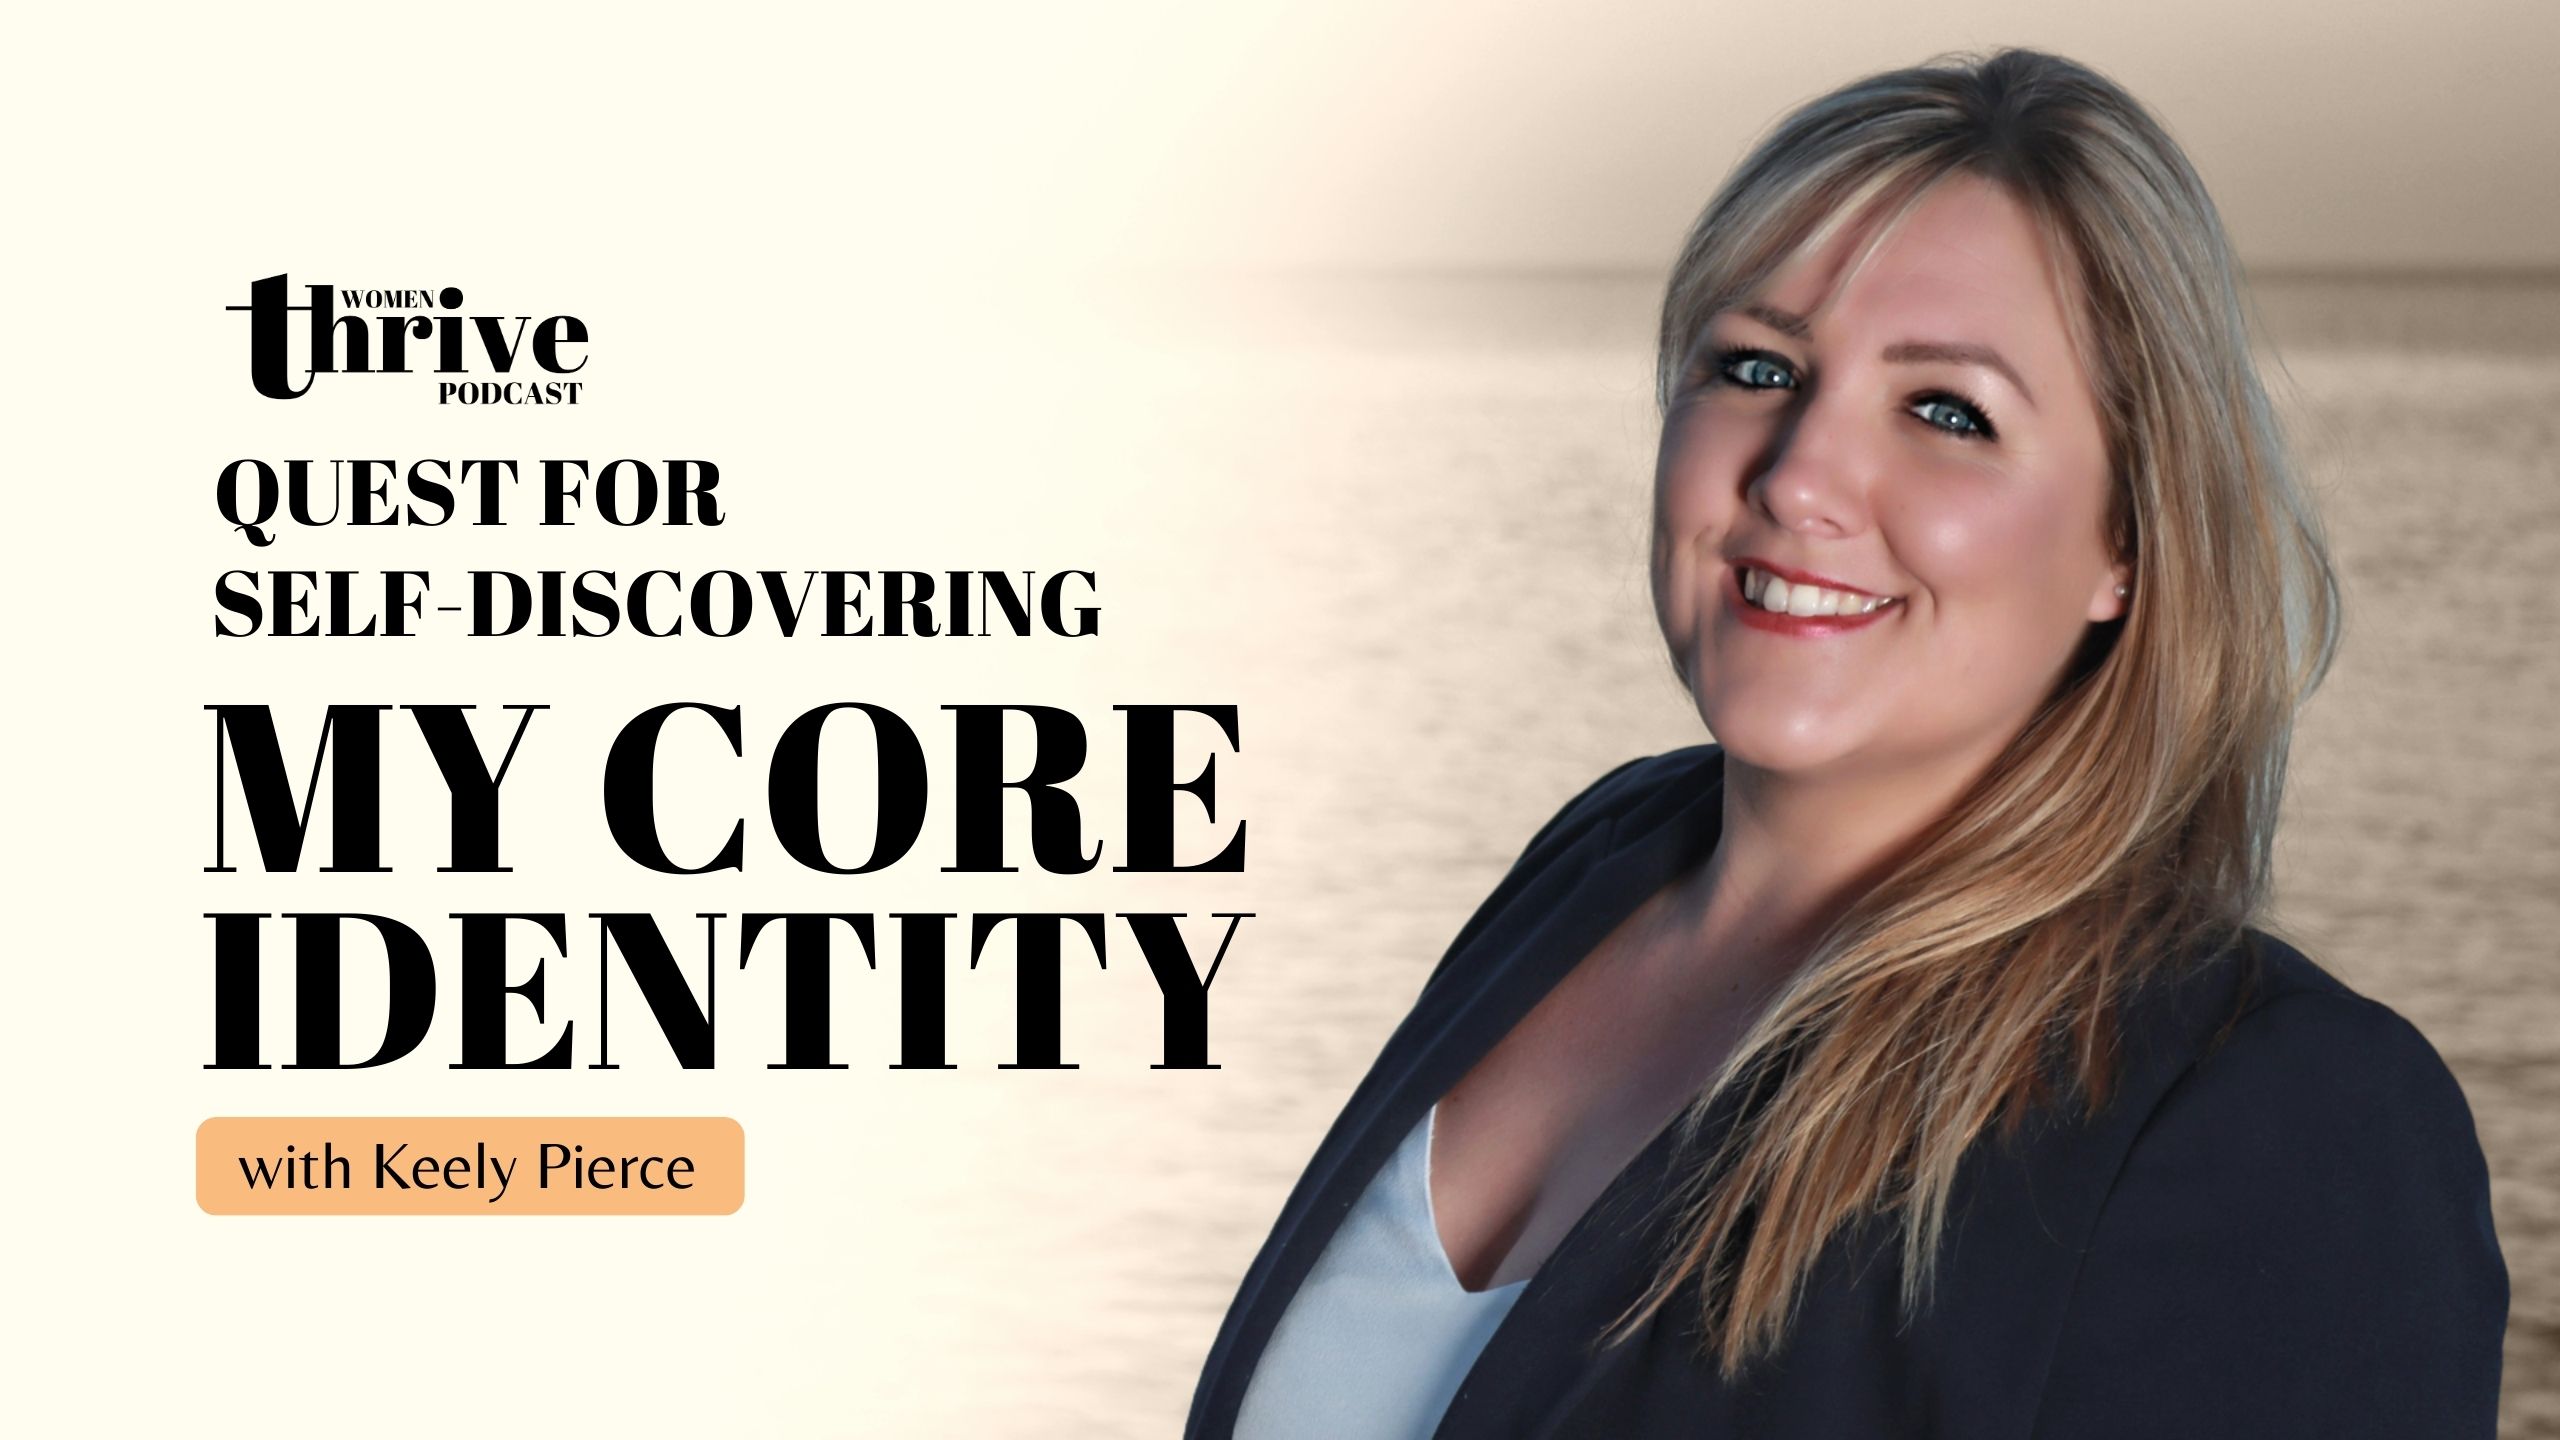 Quest for Self-Discovering My Core Identity with Keely Pierce